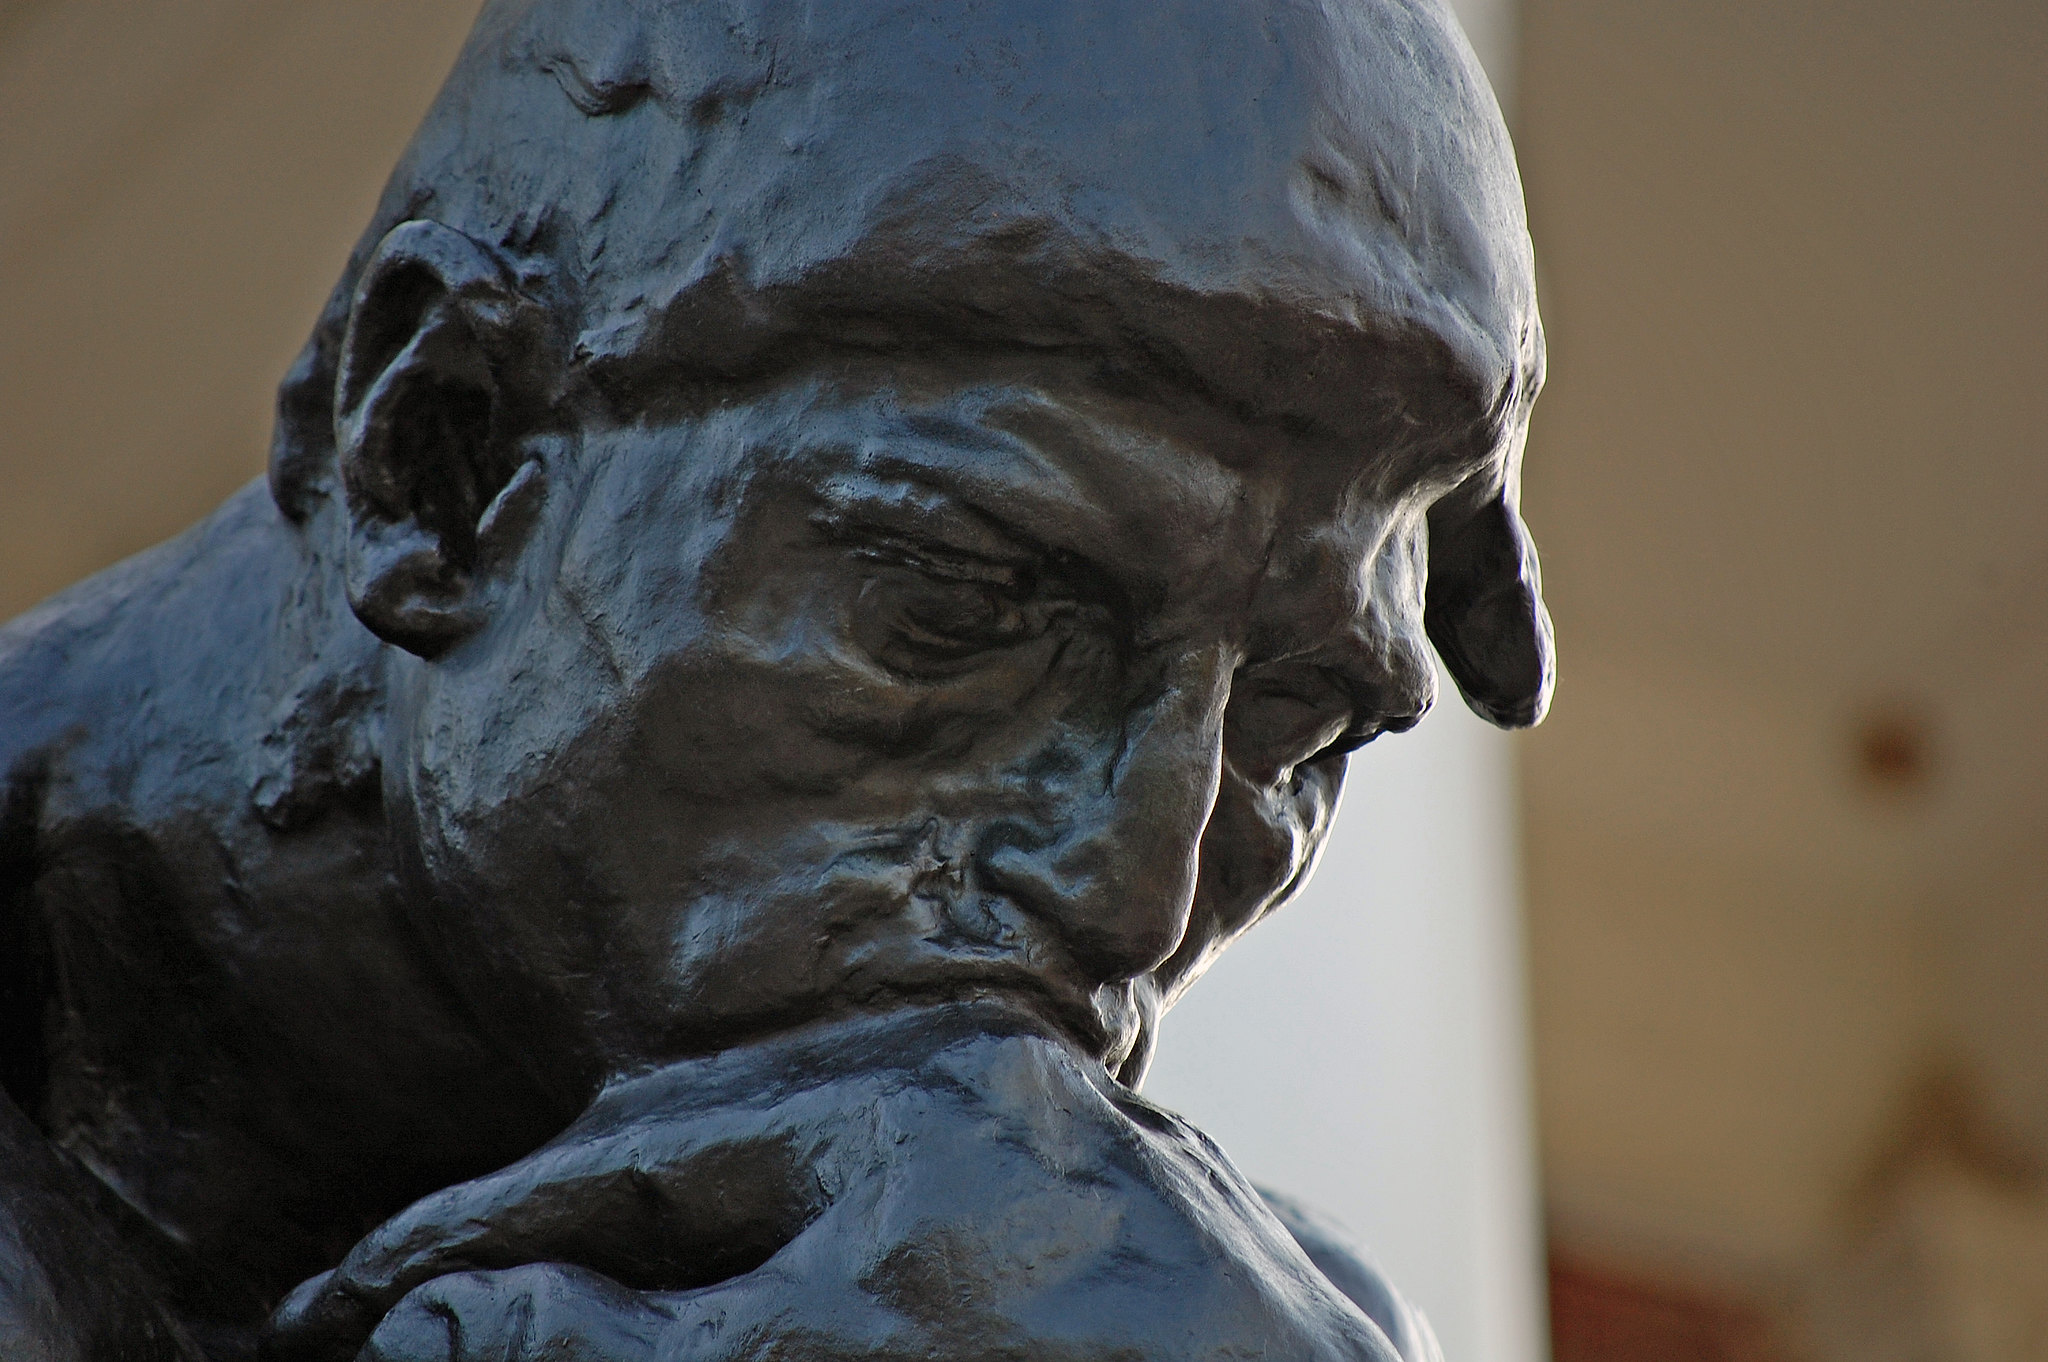 Up close image of the face of the UofL The Thinker statue